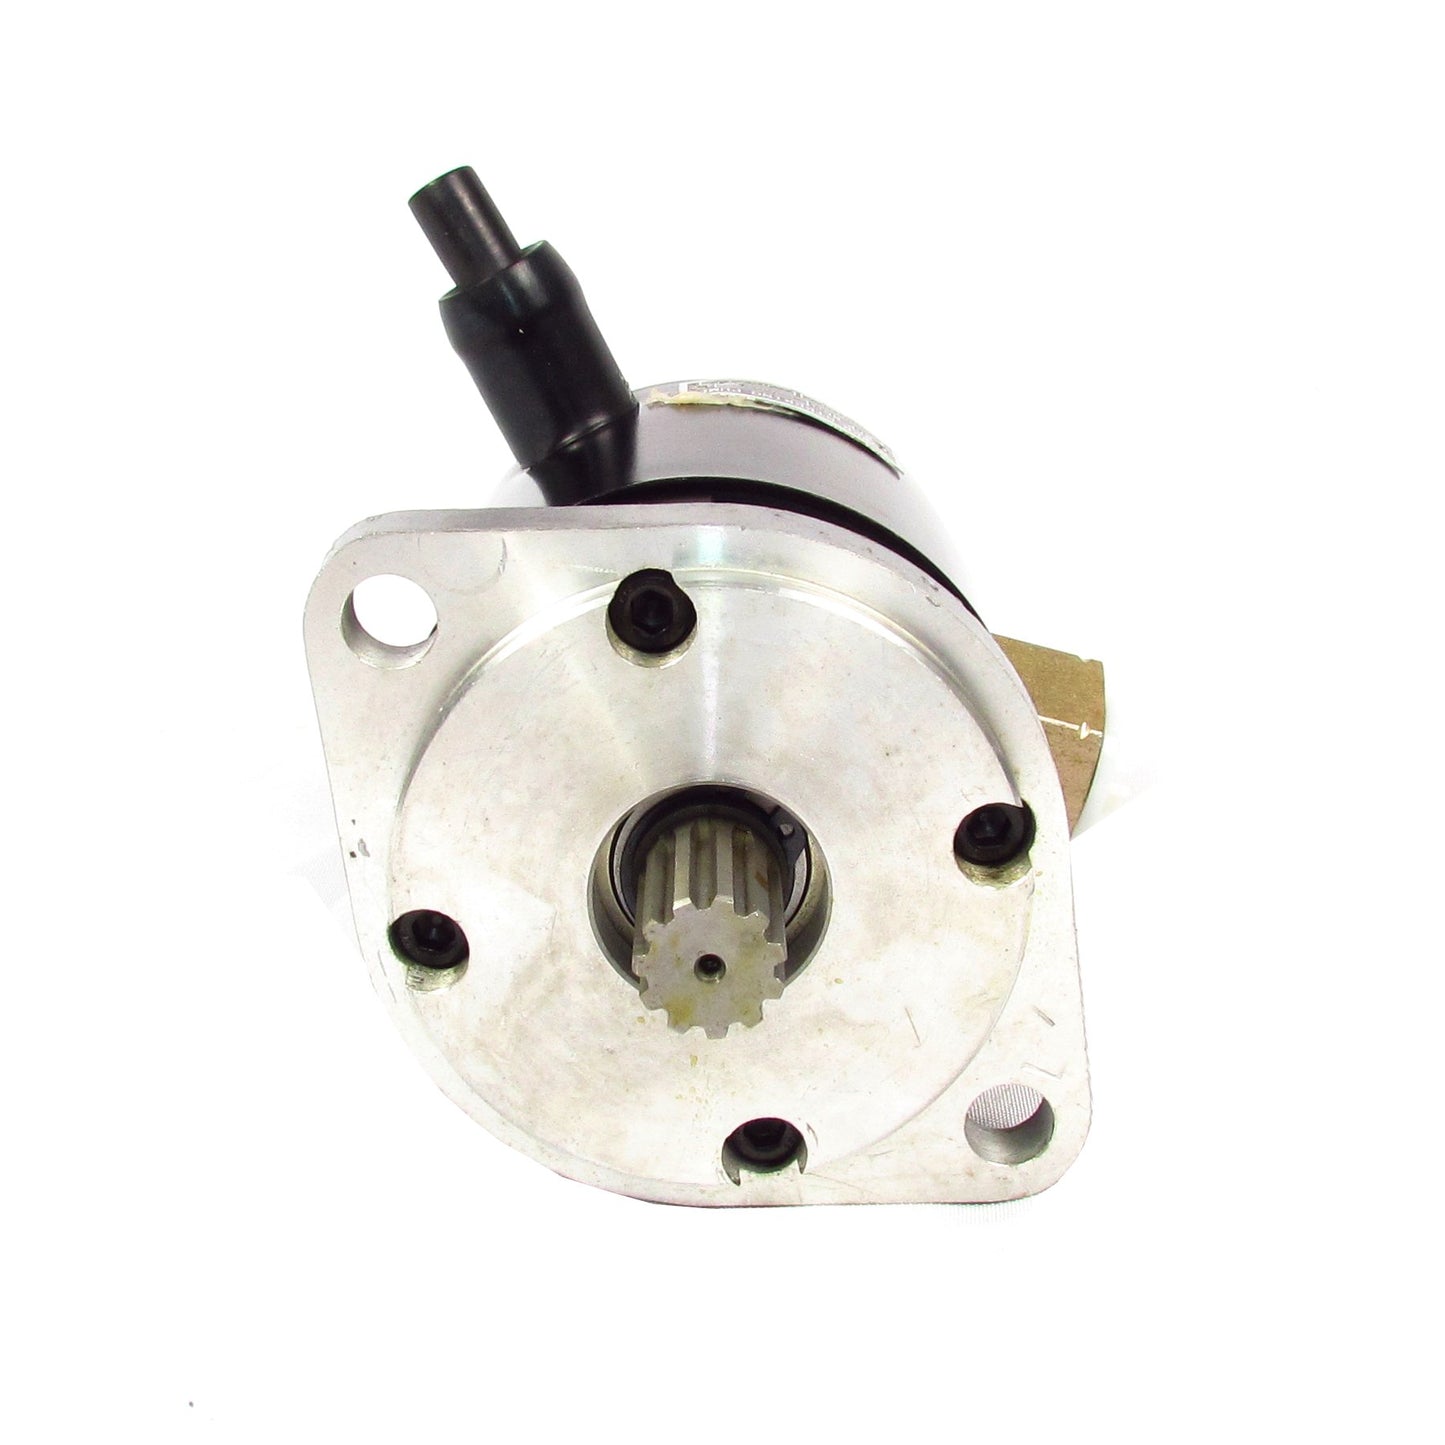 Fortpro Power Steering Pump Compatible with Caterpillar 3116 Engines | F255707